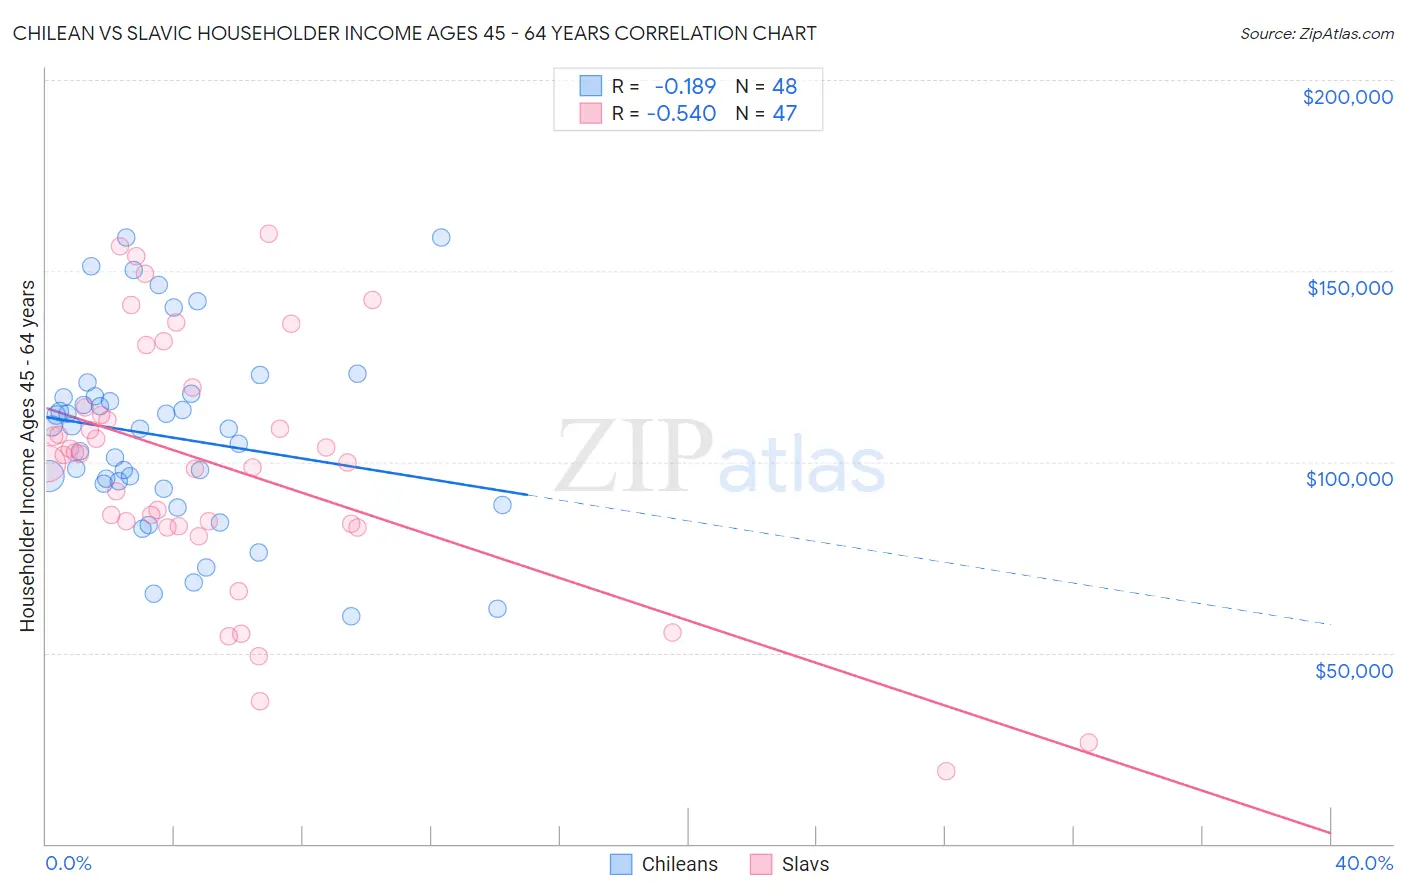 Chilean vs Slavic Householder Income Ages 45 - 64 years